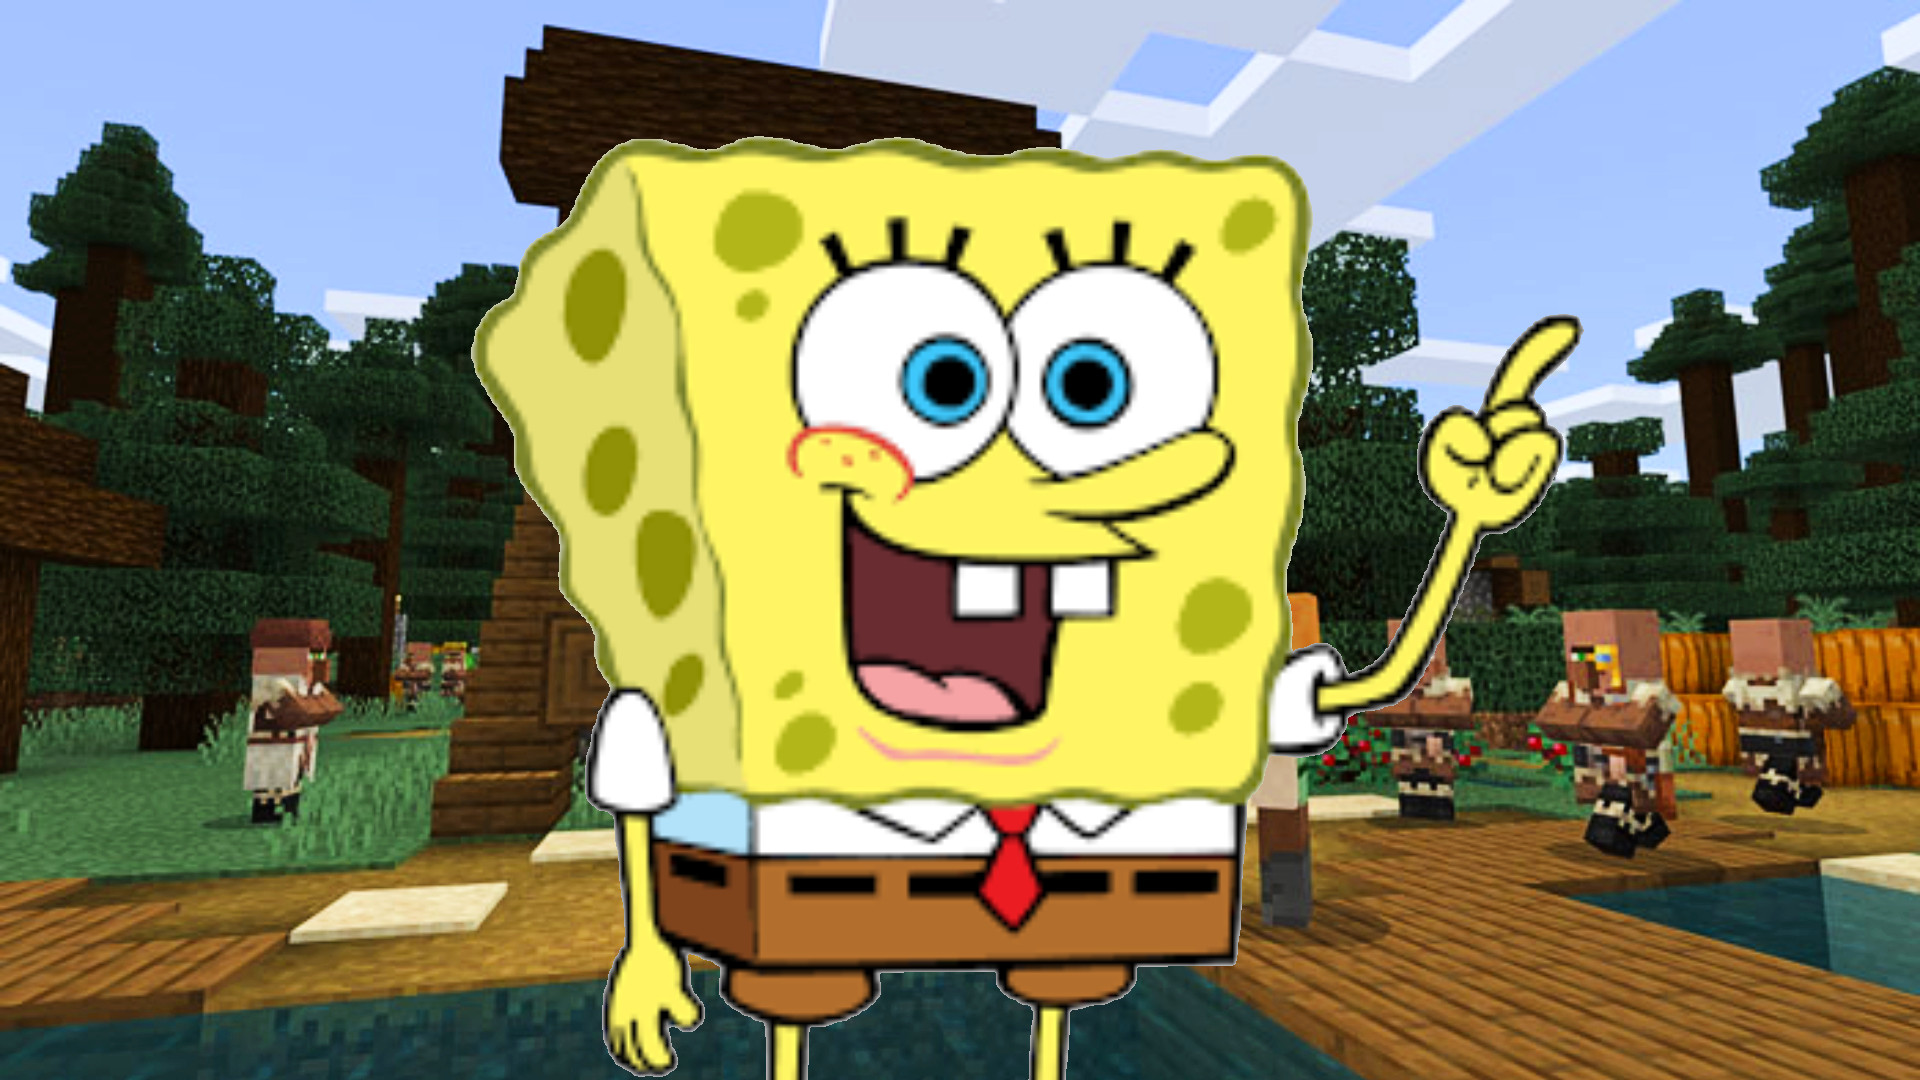 Minecraft Now promises the best day ever with Spongebob DLC